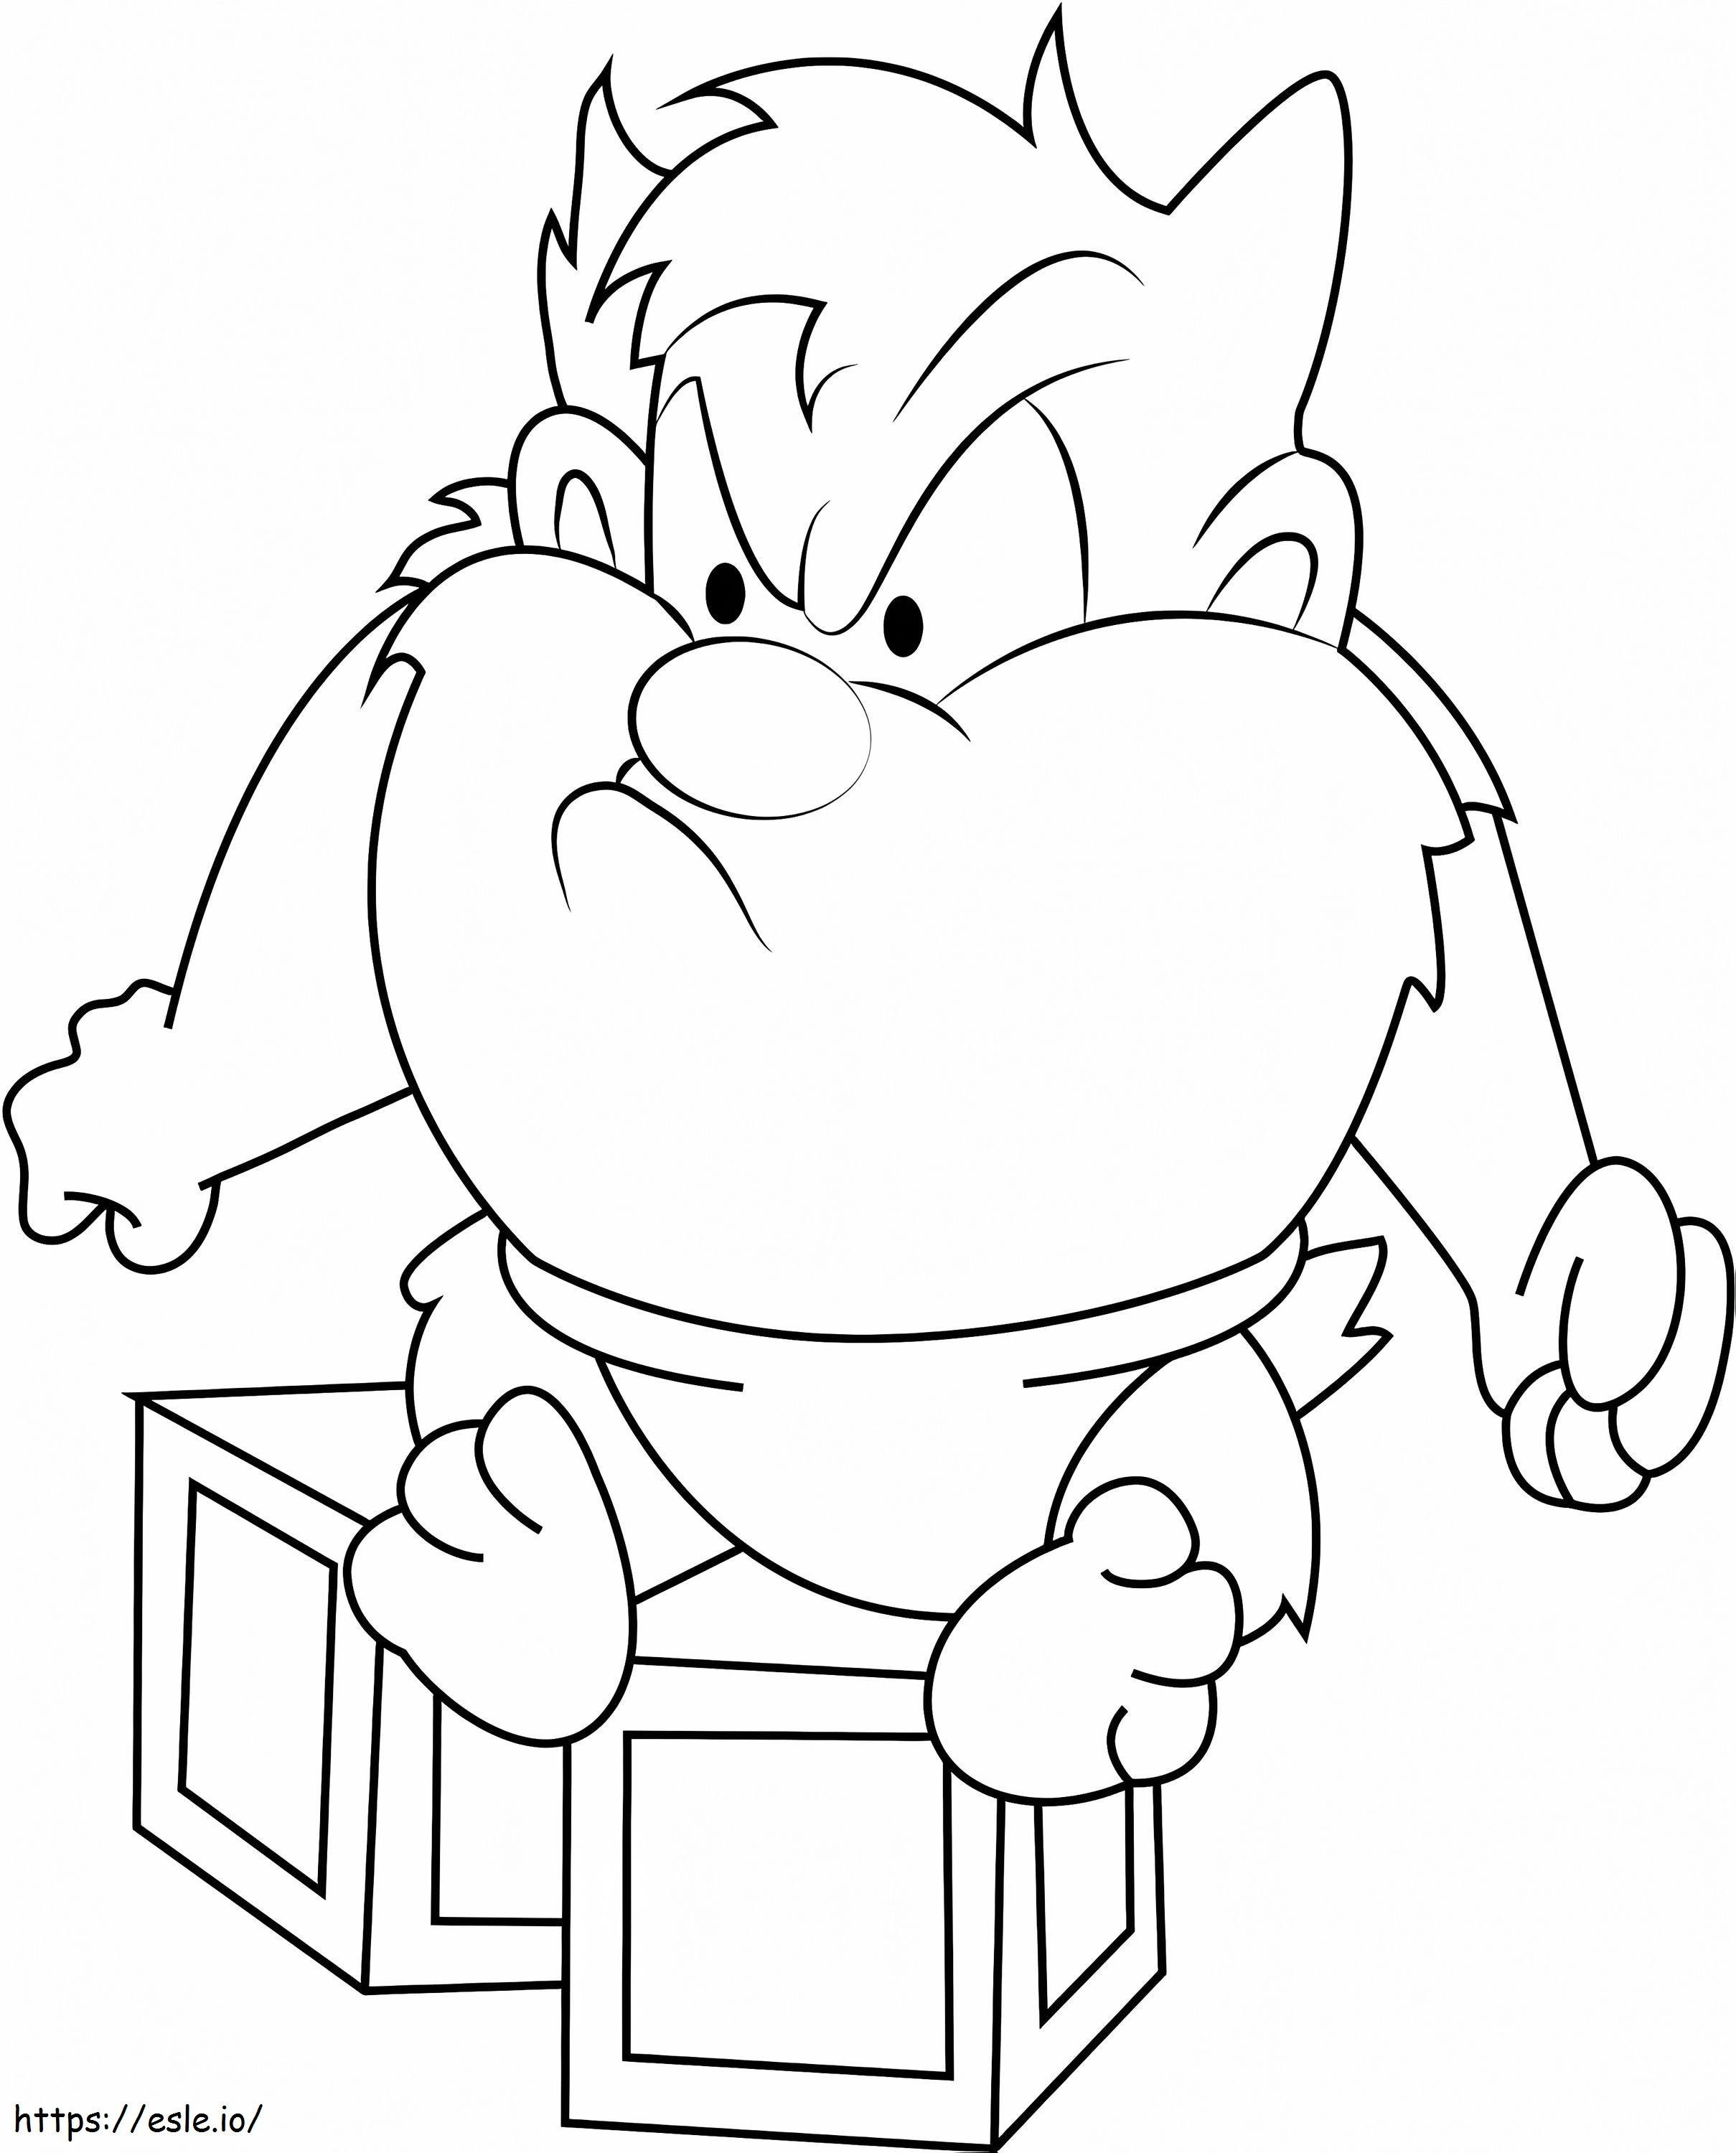 1531450506 Angry Baby Taz A4 coloring page